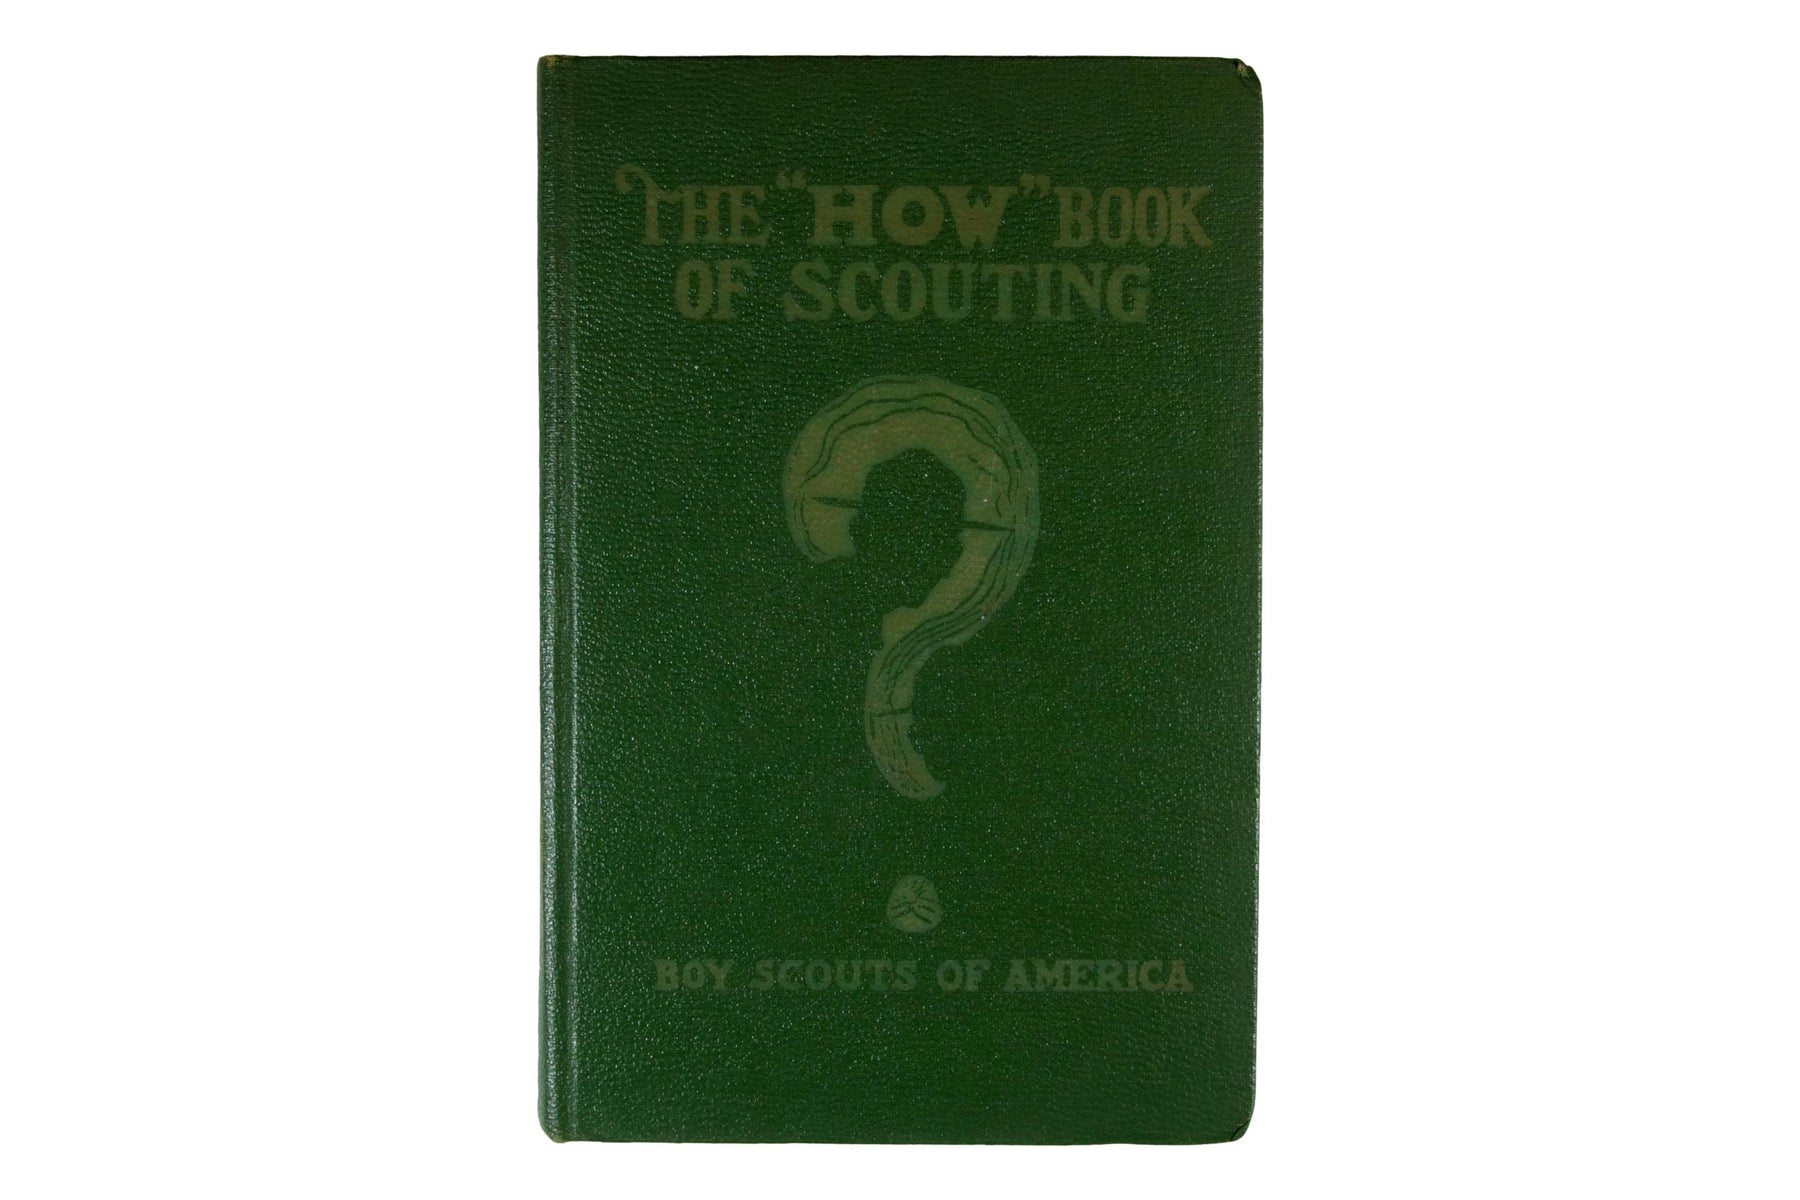 How Book of Scouting 1941